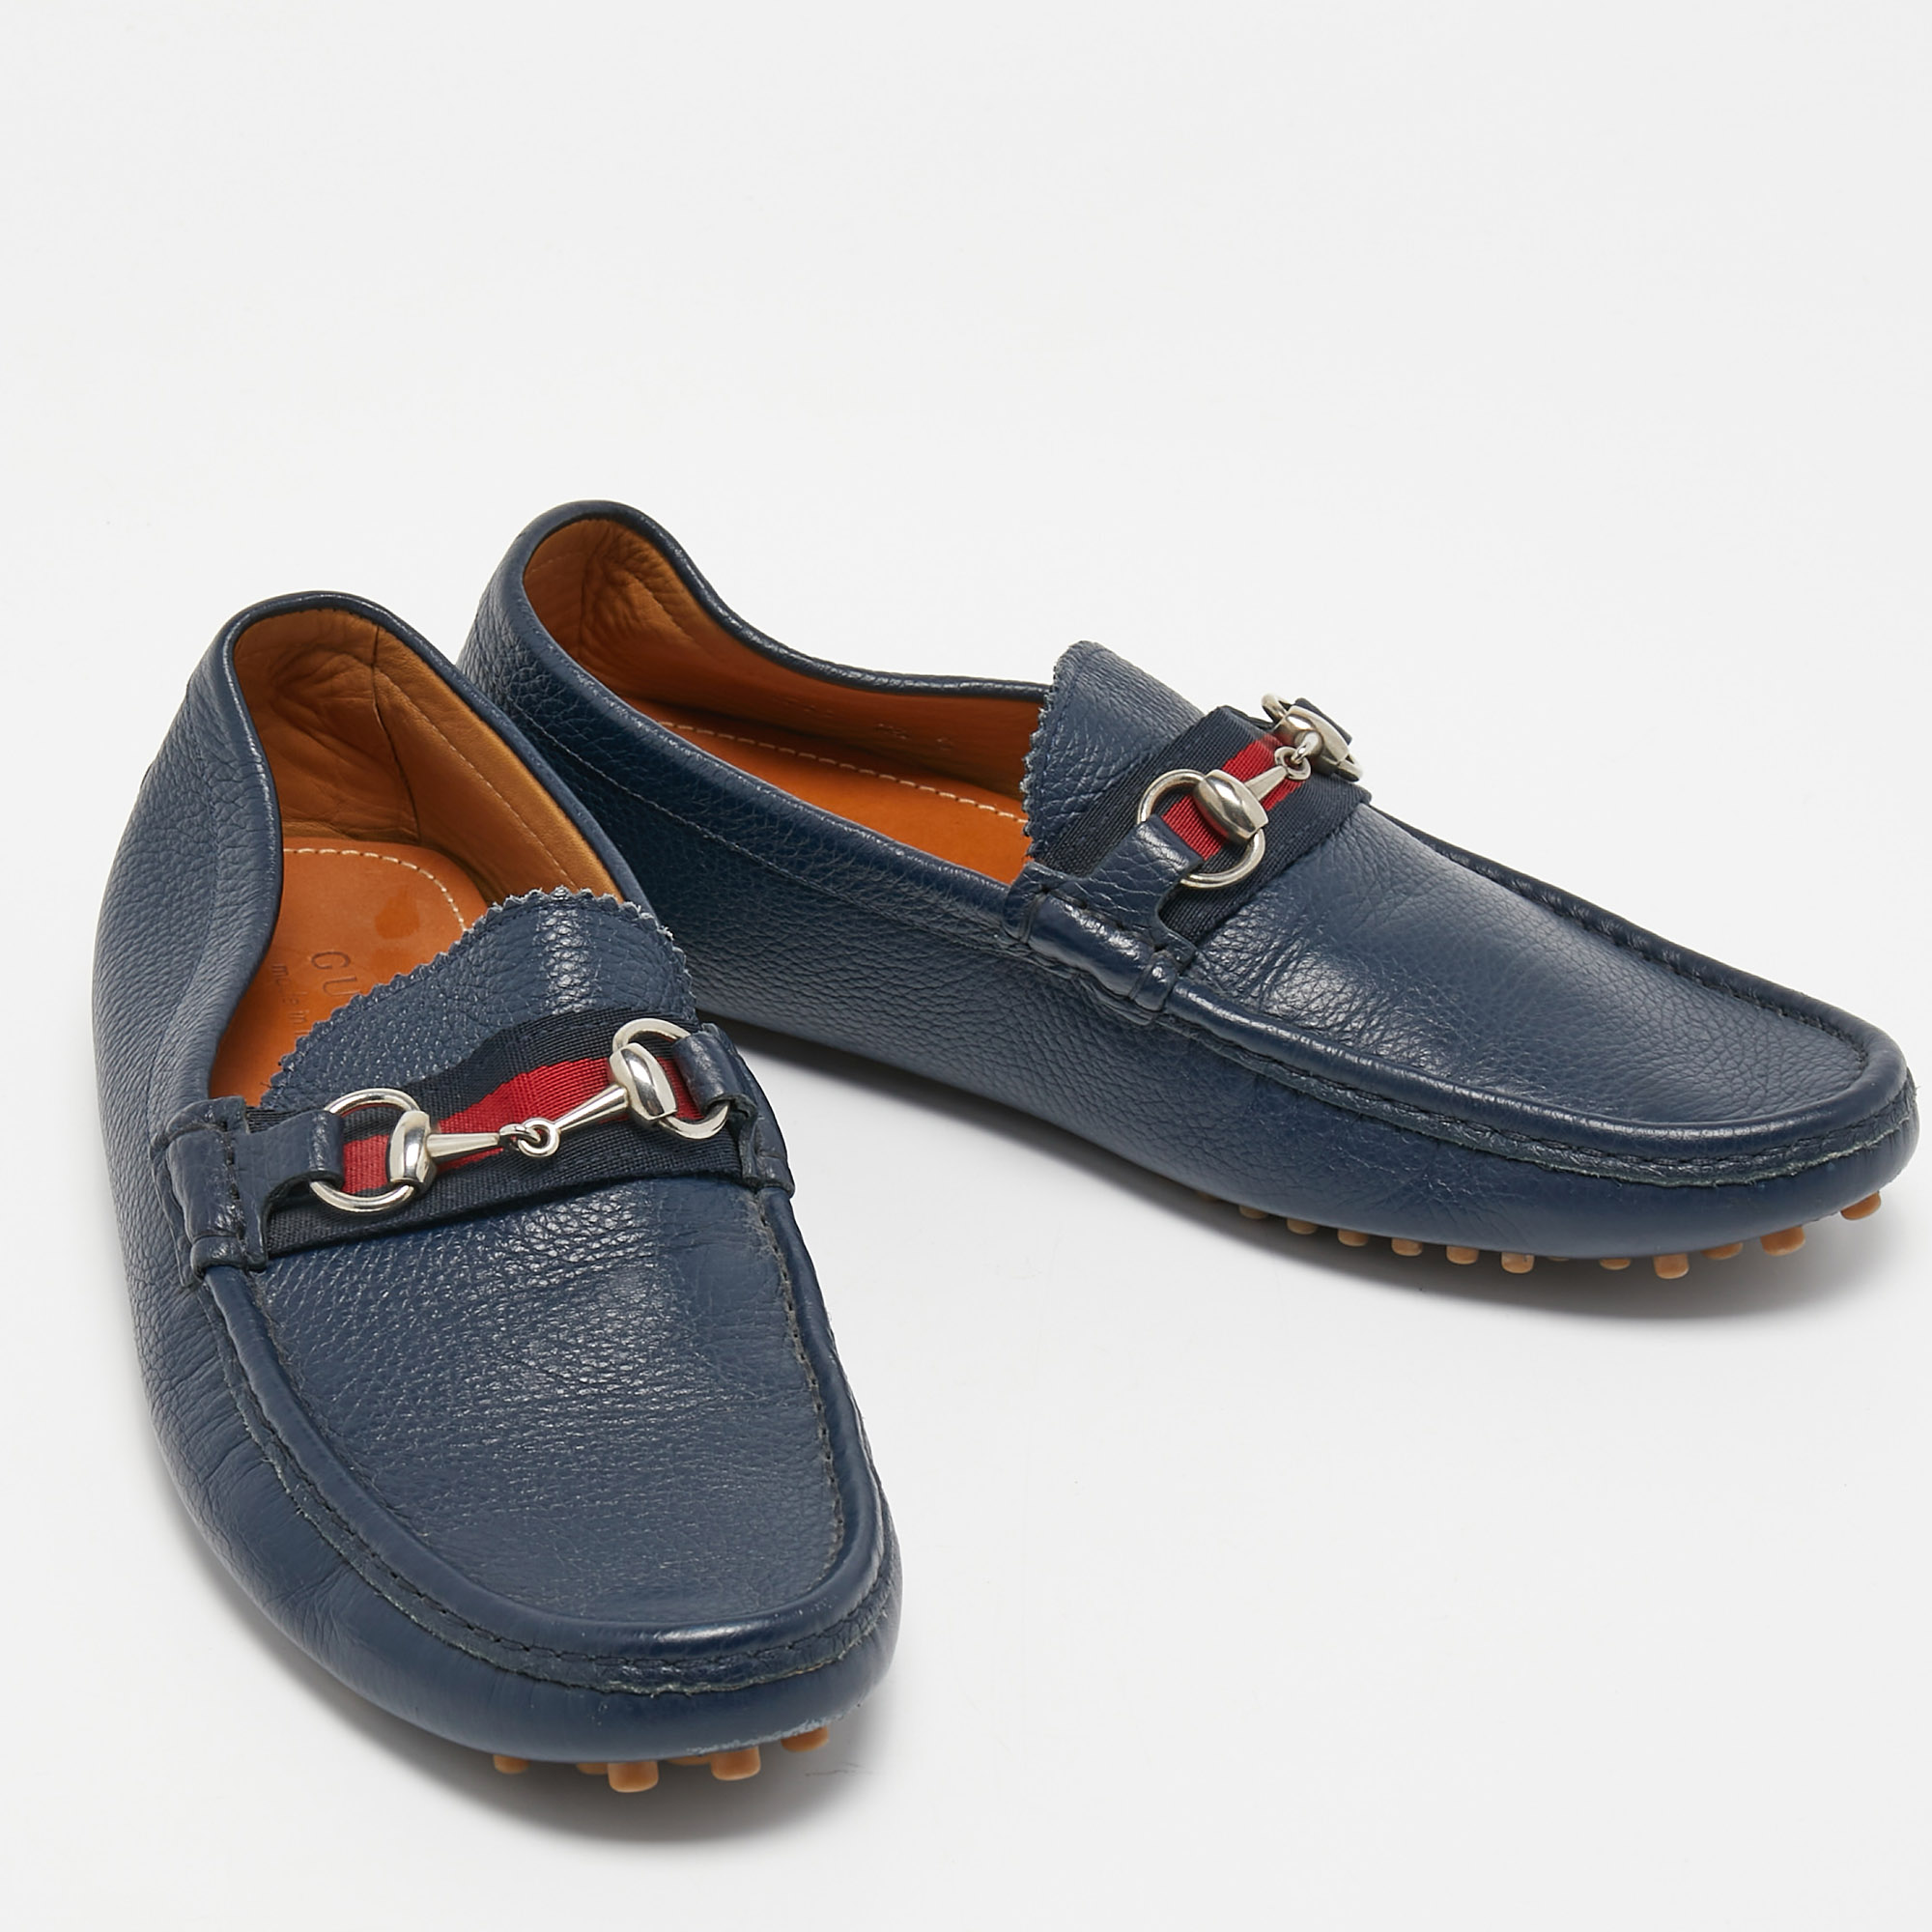 Gucci Navy Blue Leather Horsebit Slip On Loafers Size 42.5